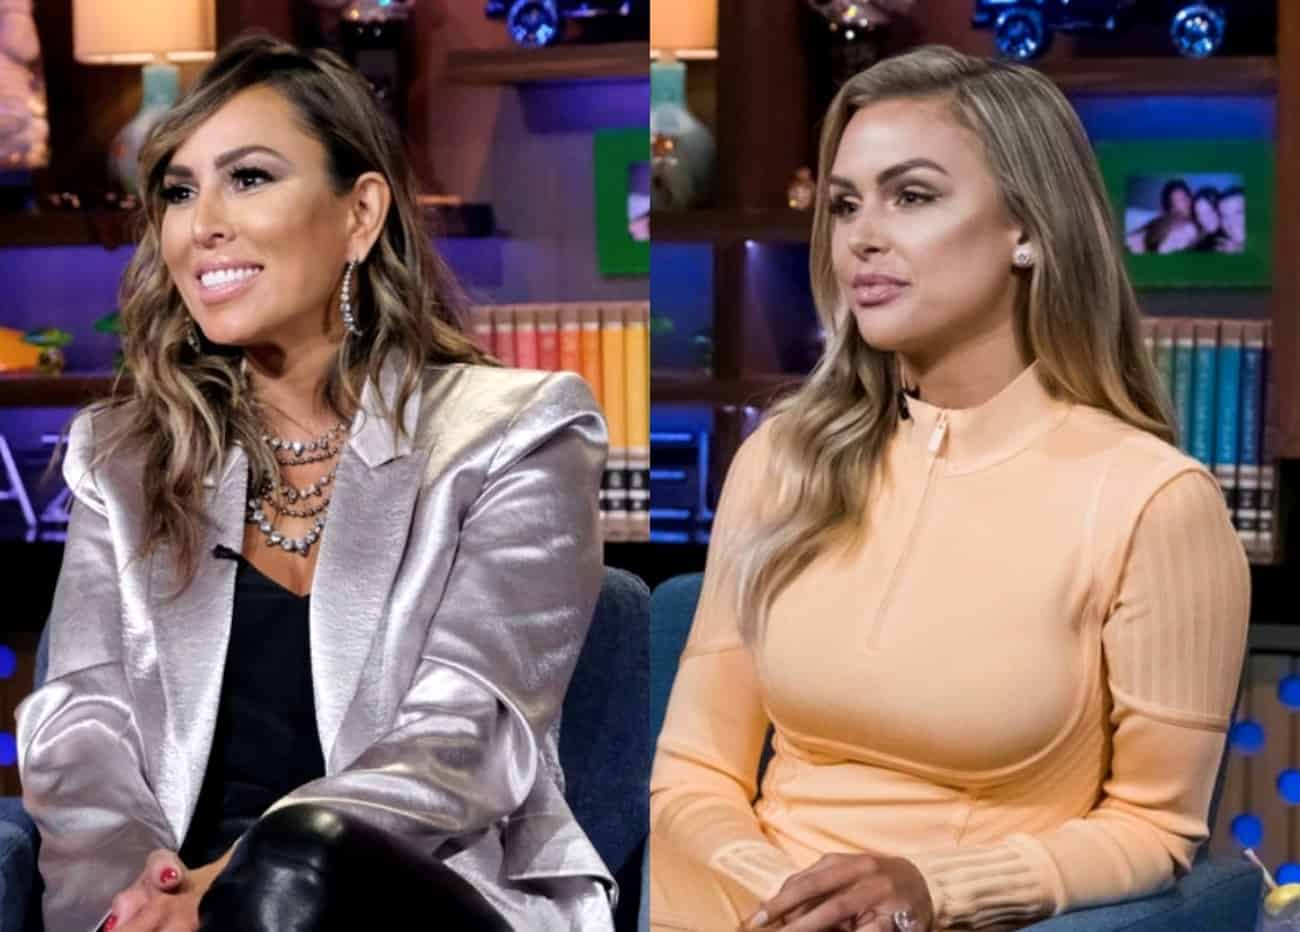 RHOC Alum Kelly Dodd Shades Lala Kent as a "Whack Job," Claims No Man Would Put Up With Her and Labels Randall Emmett an "Alleged Crook"